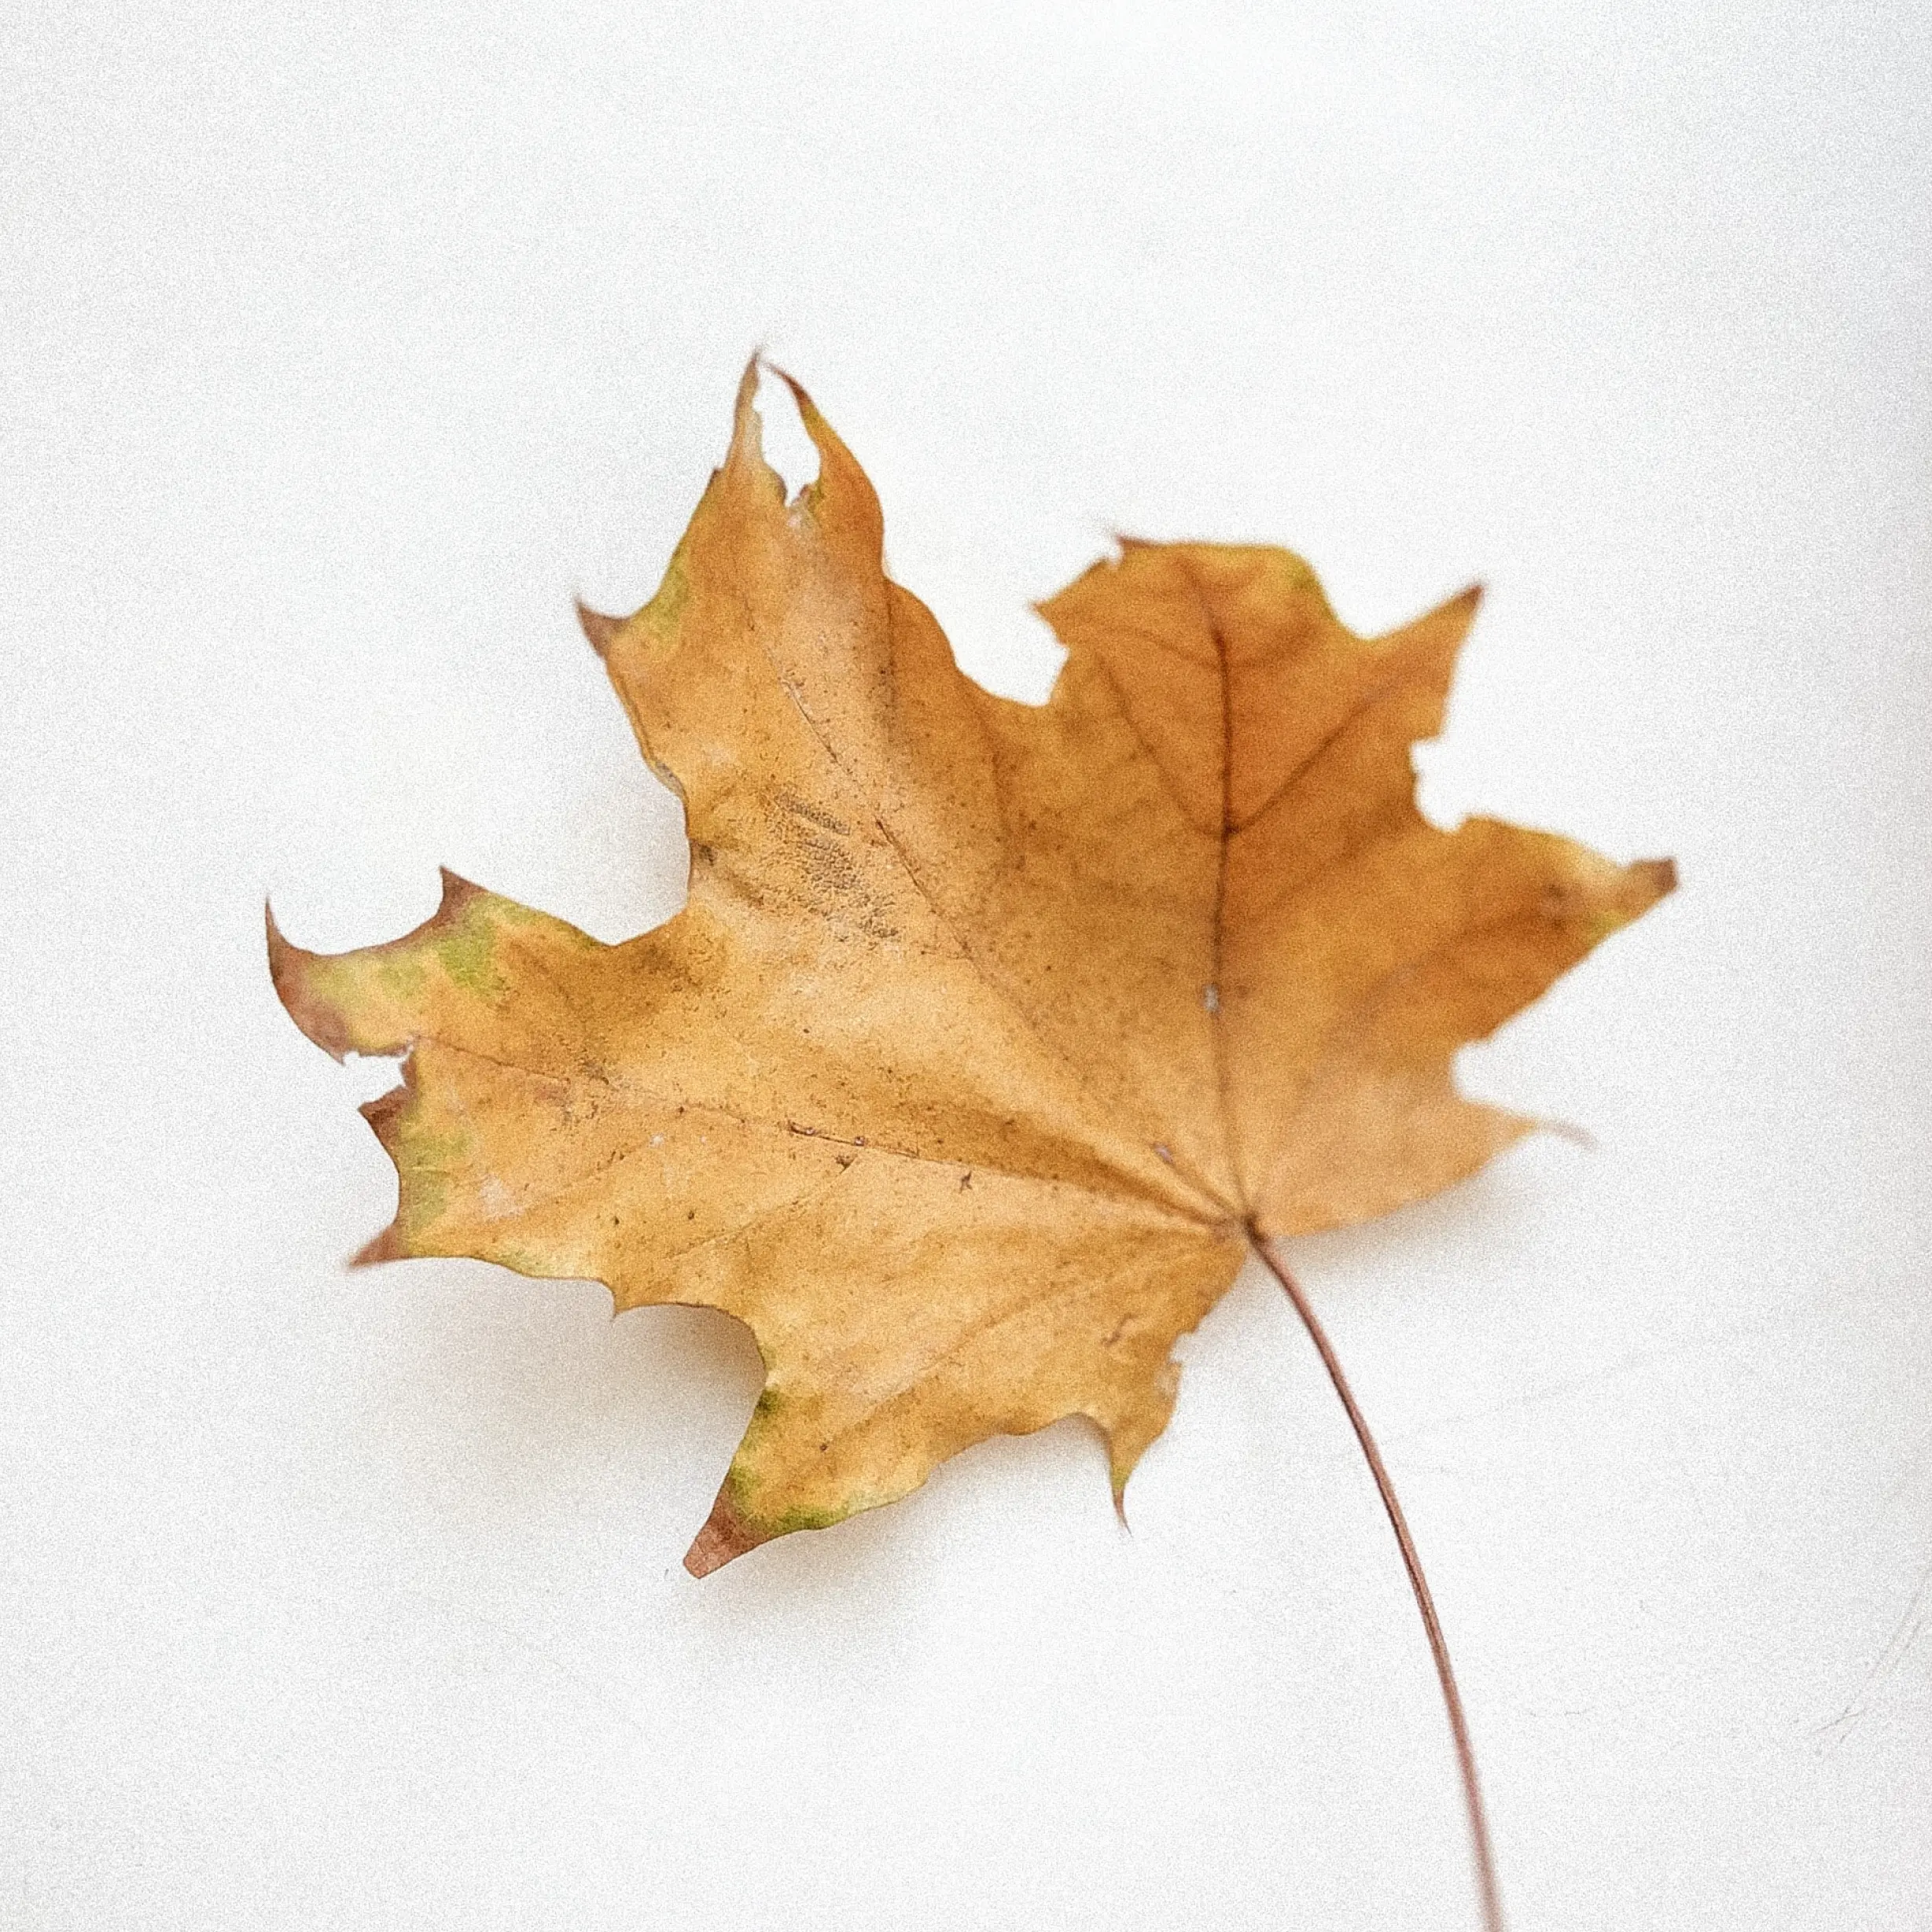 A sharp and detailed photo of a brown maple leaf on white background representing our work for Canon USA, Inc.